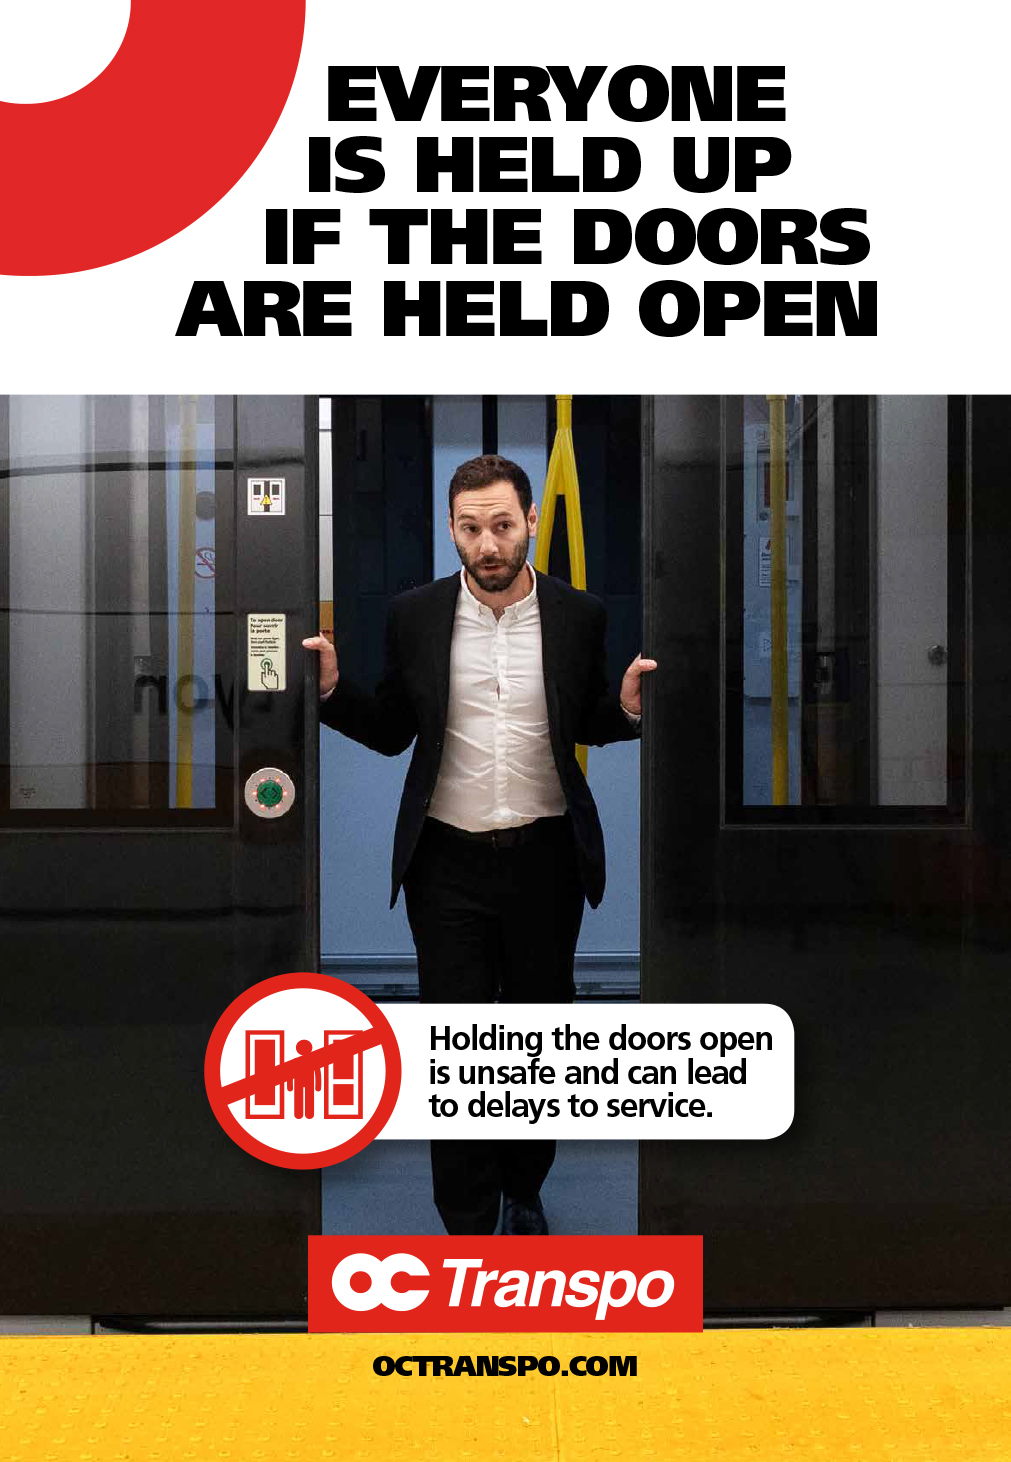 Man prying open train doors with image text: Everyone is held up if the doors are held open